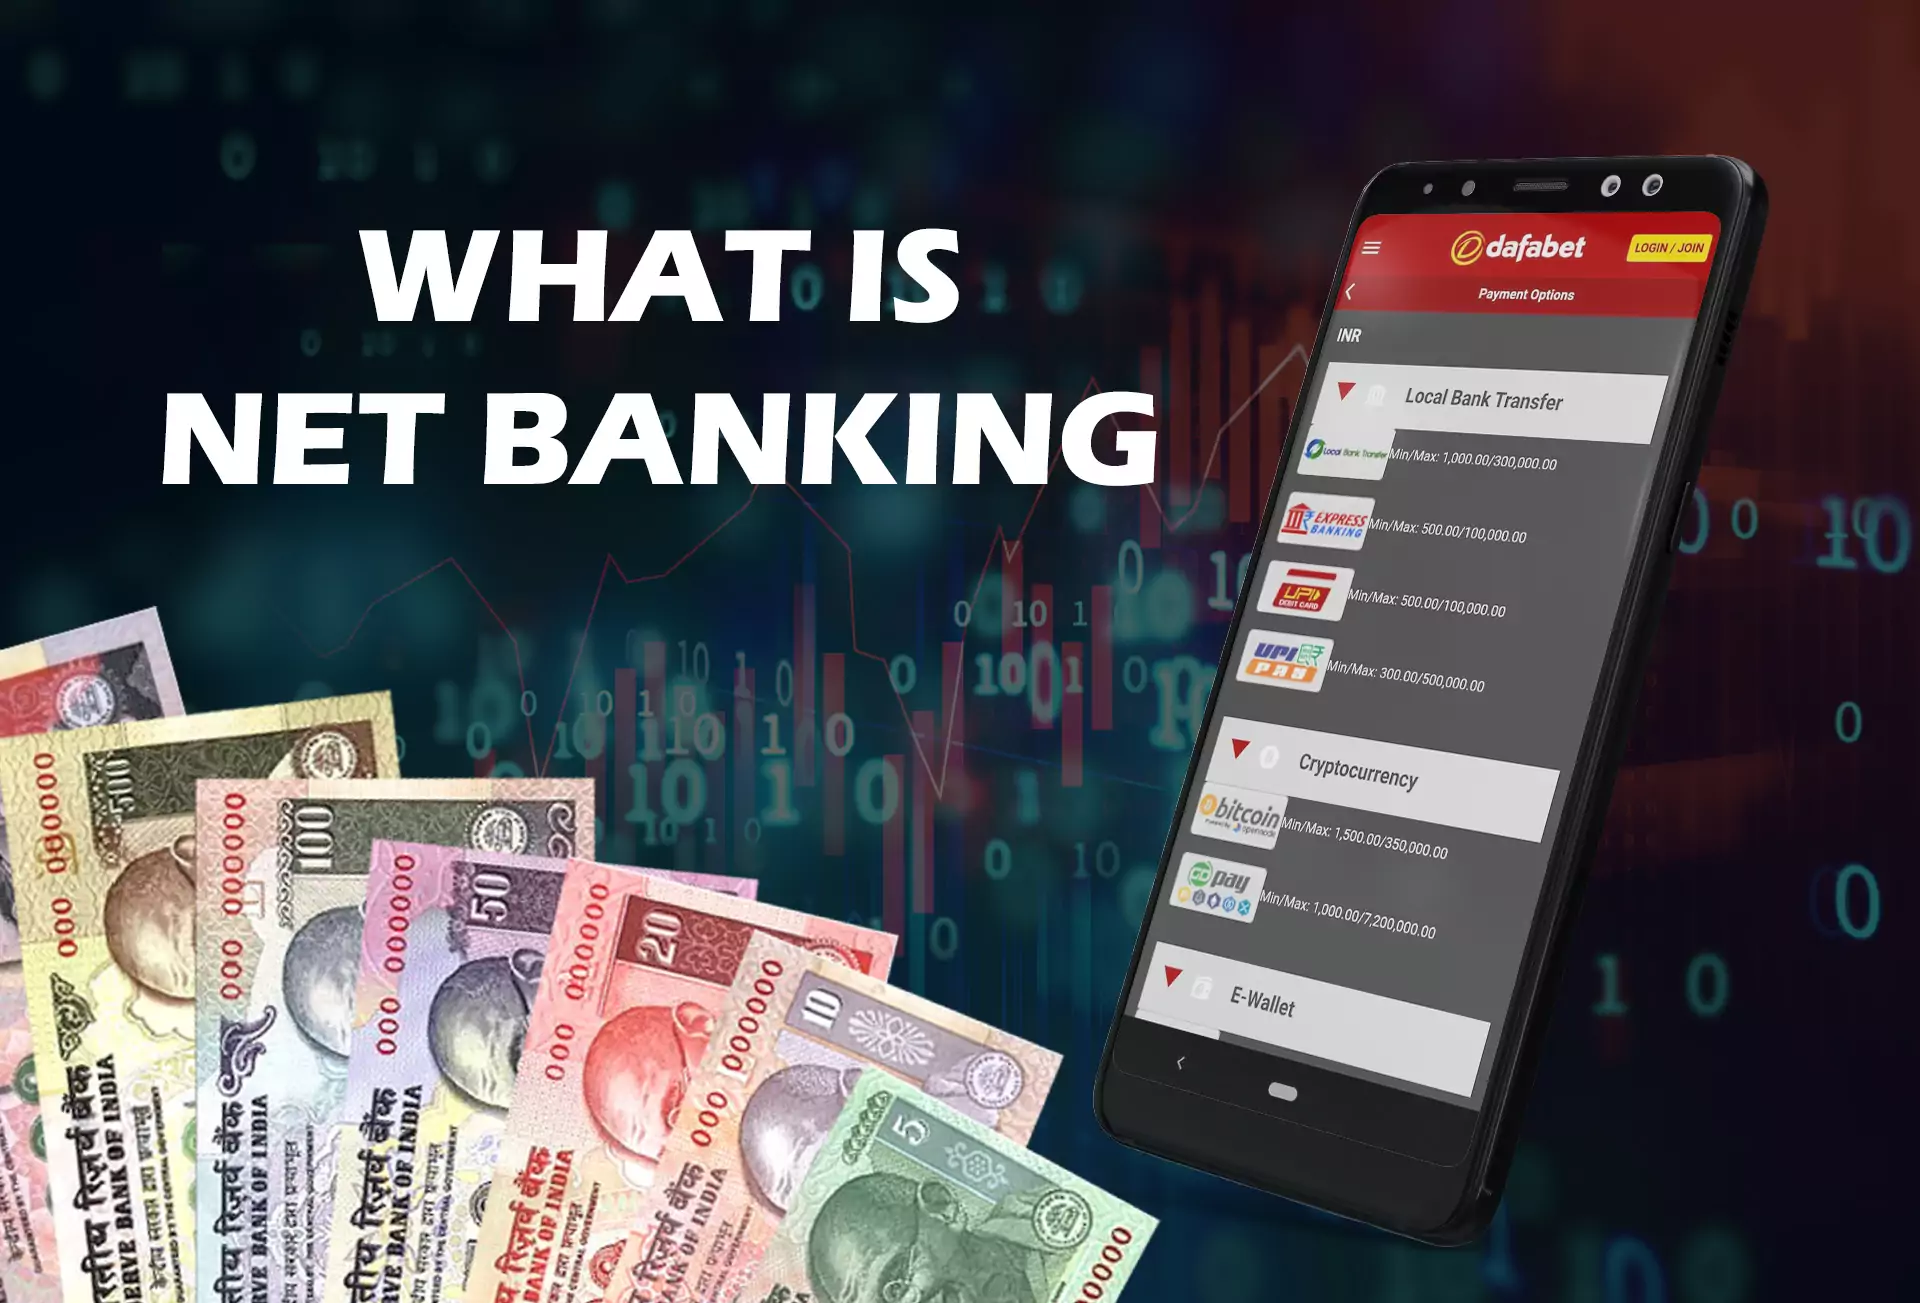 Net Banking is a convenient and absolutely great service of modern banks.